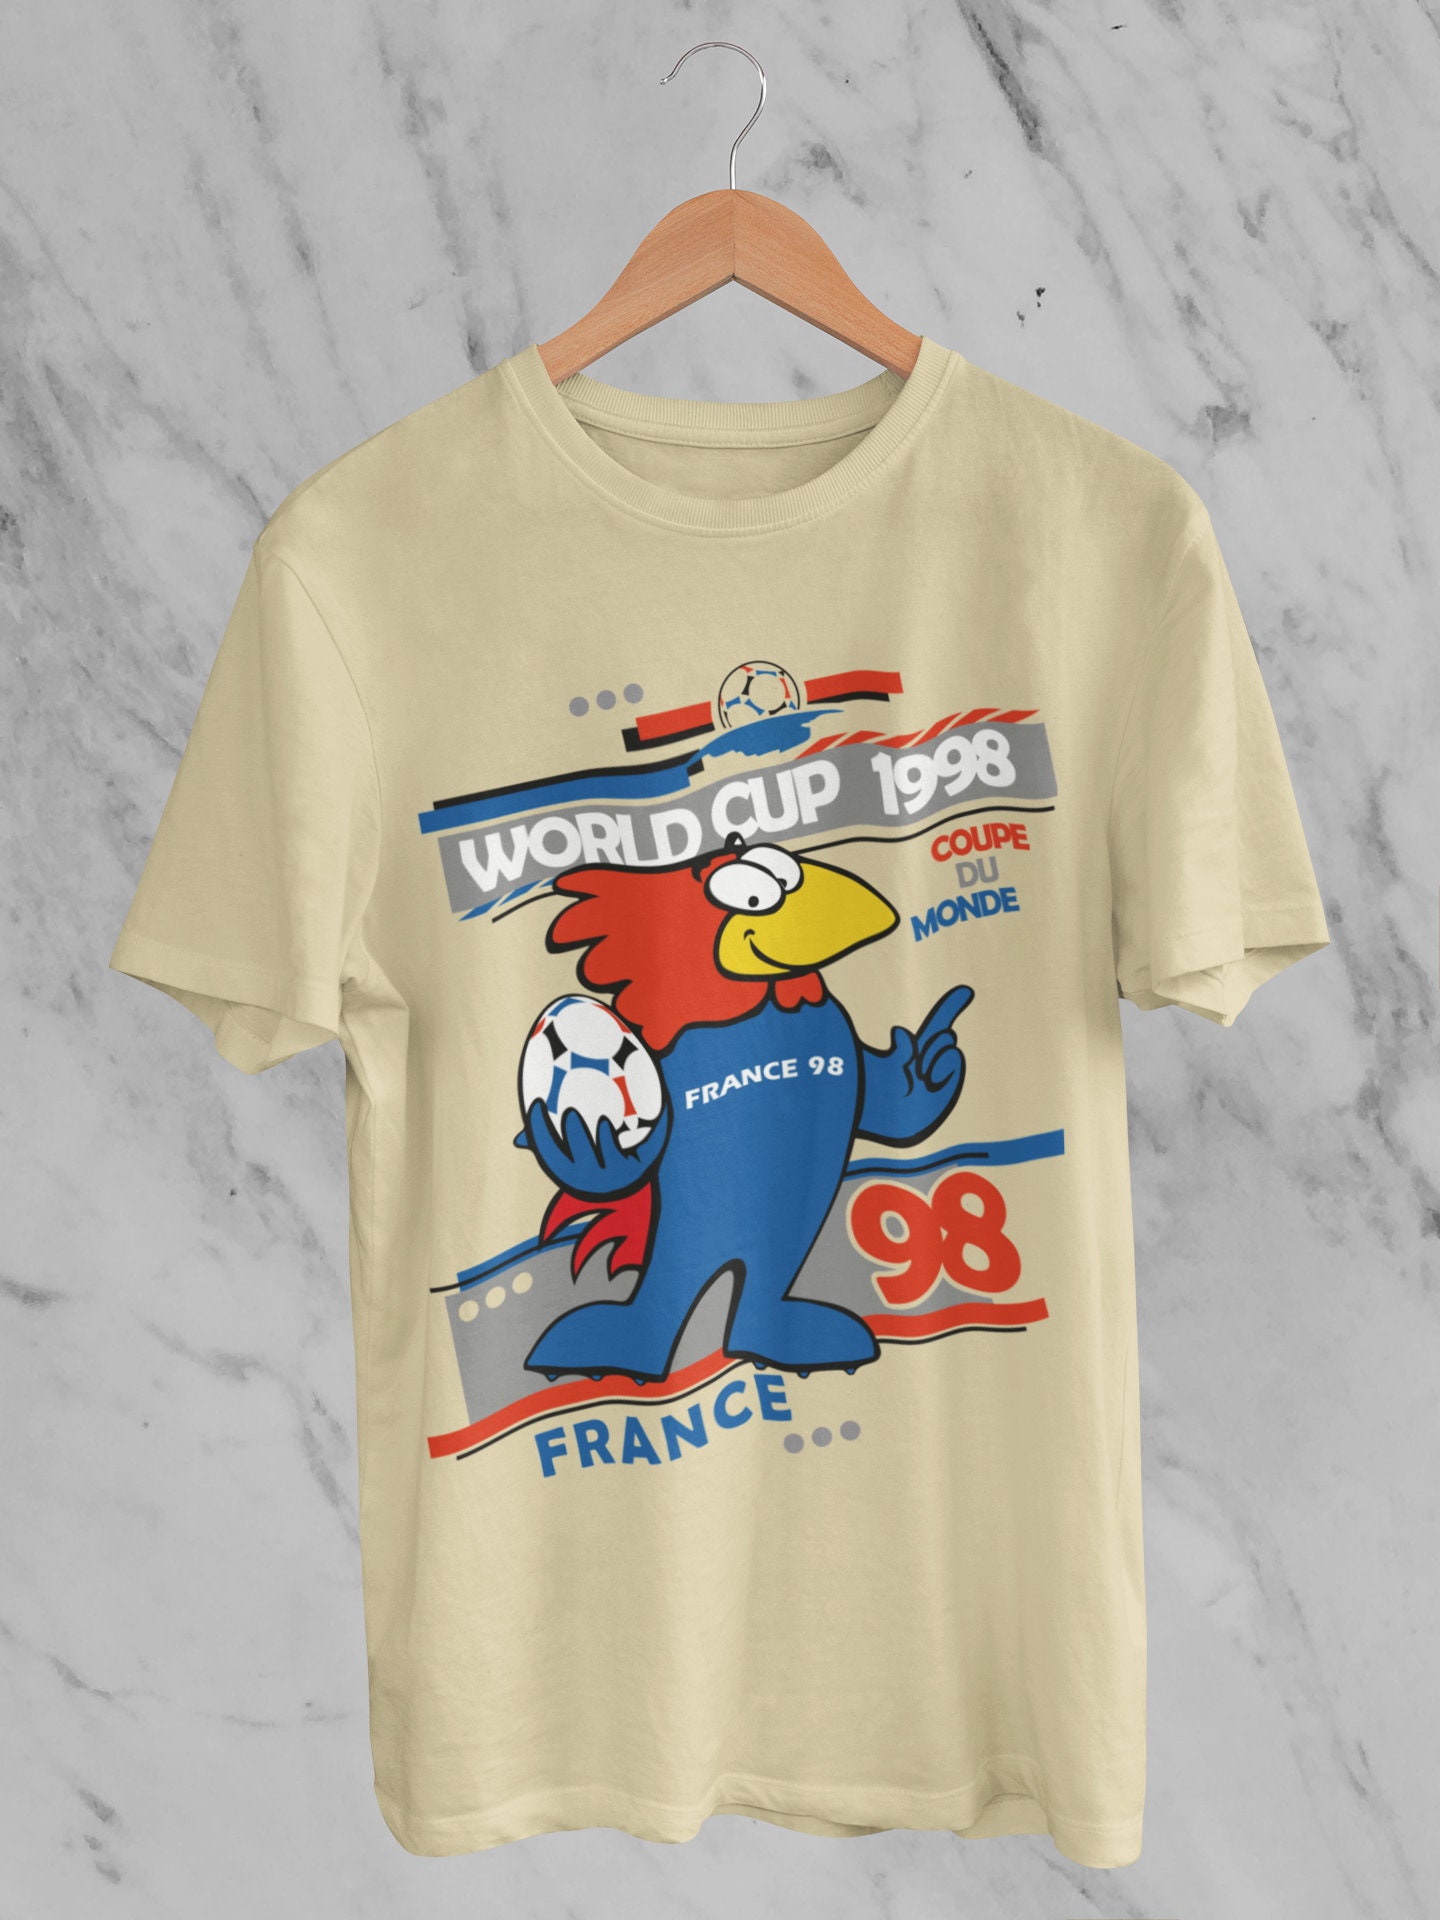 Discover Footix - France 98 Classic T-Shirt, Vintage Mascot World Cup Shirt